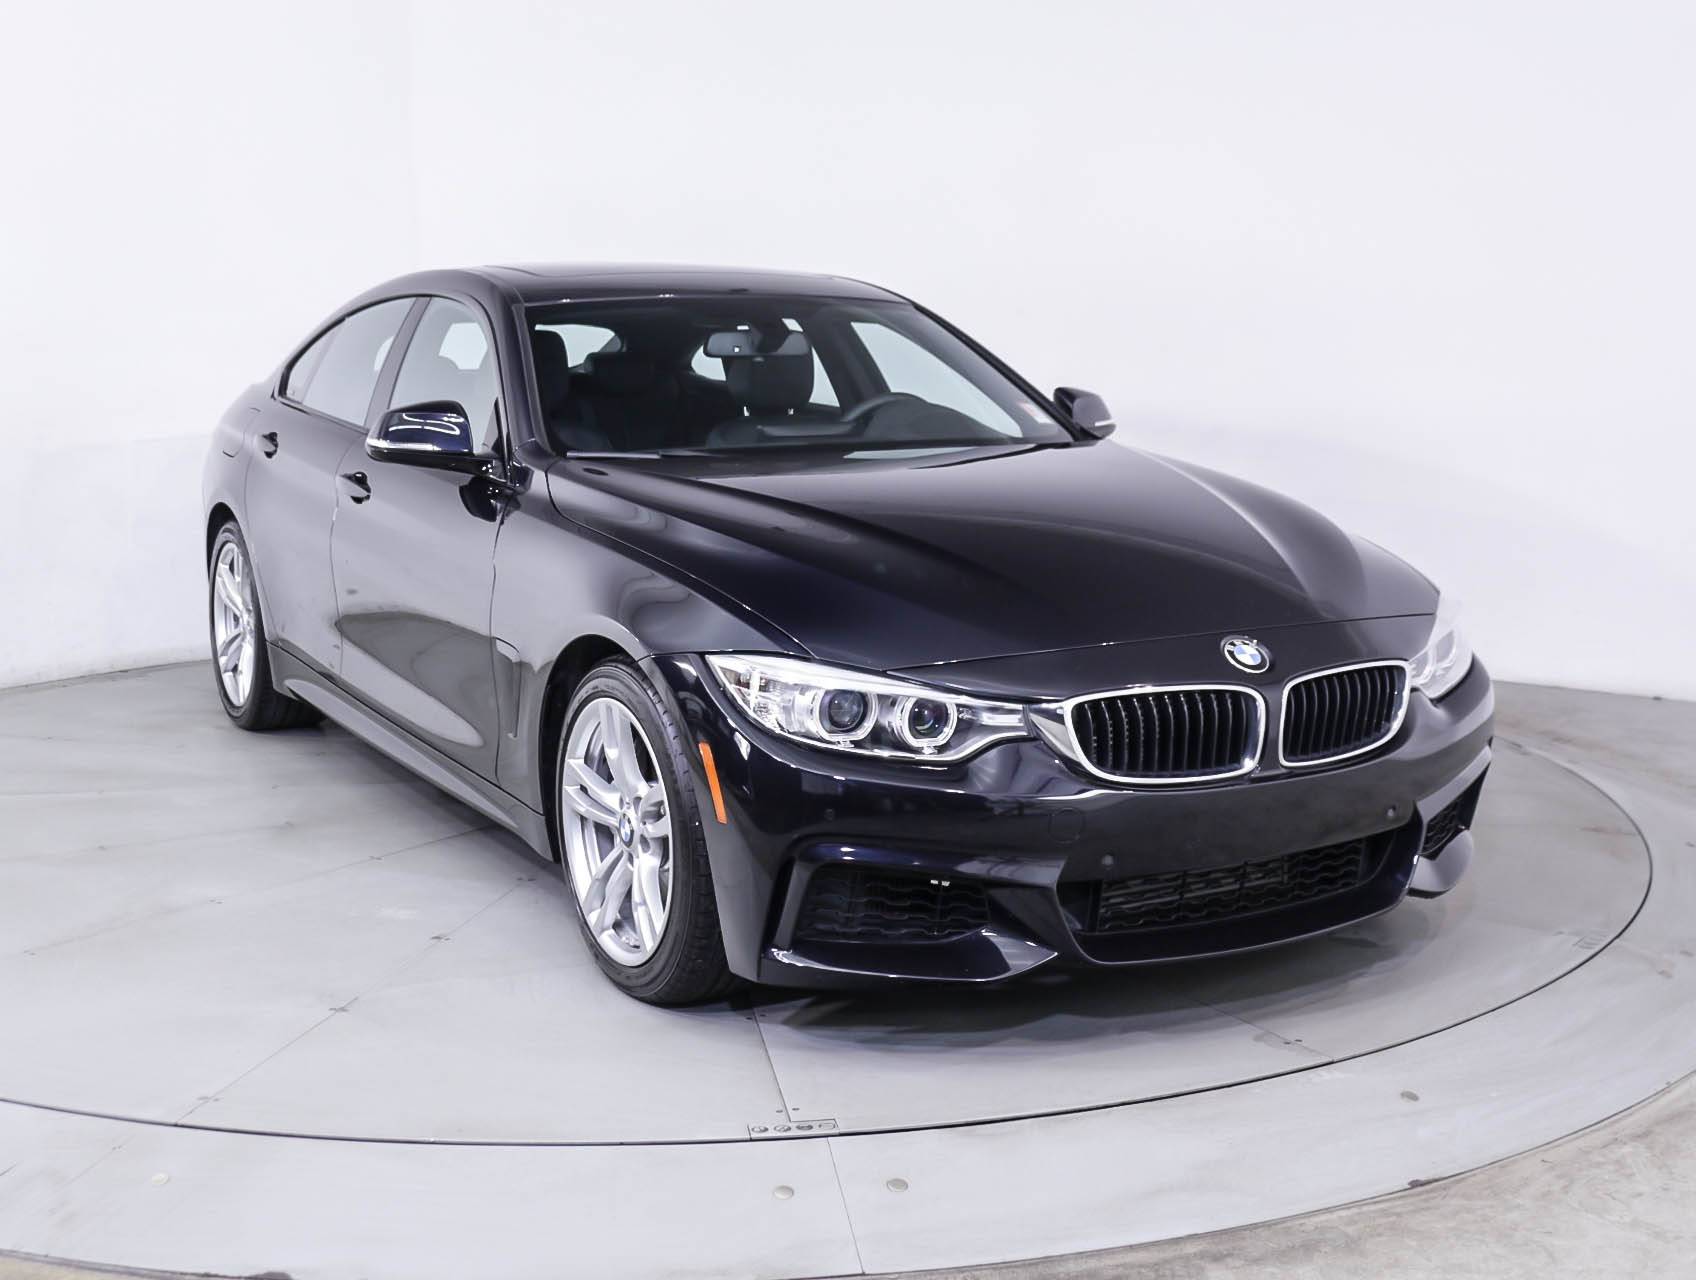 Florida Fine Cars - Used BMW 4 SERIES 2015 WEST PALM 435i Gran Coupe Msp